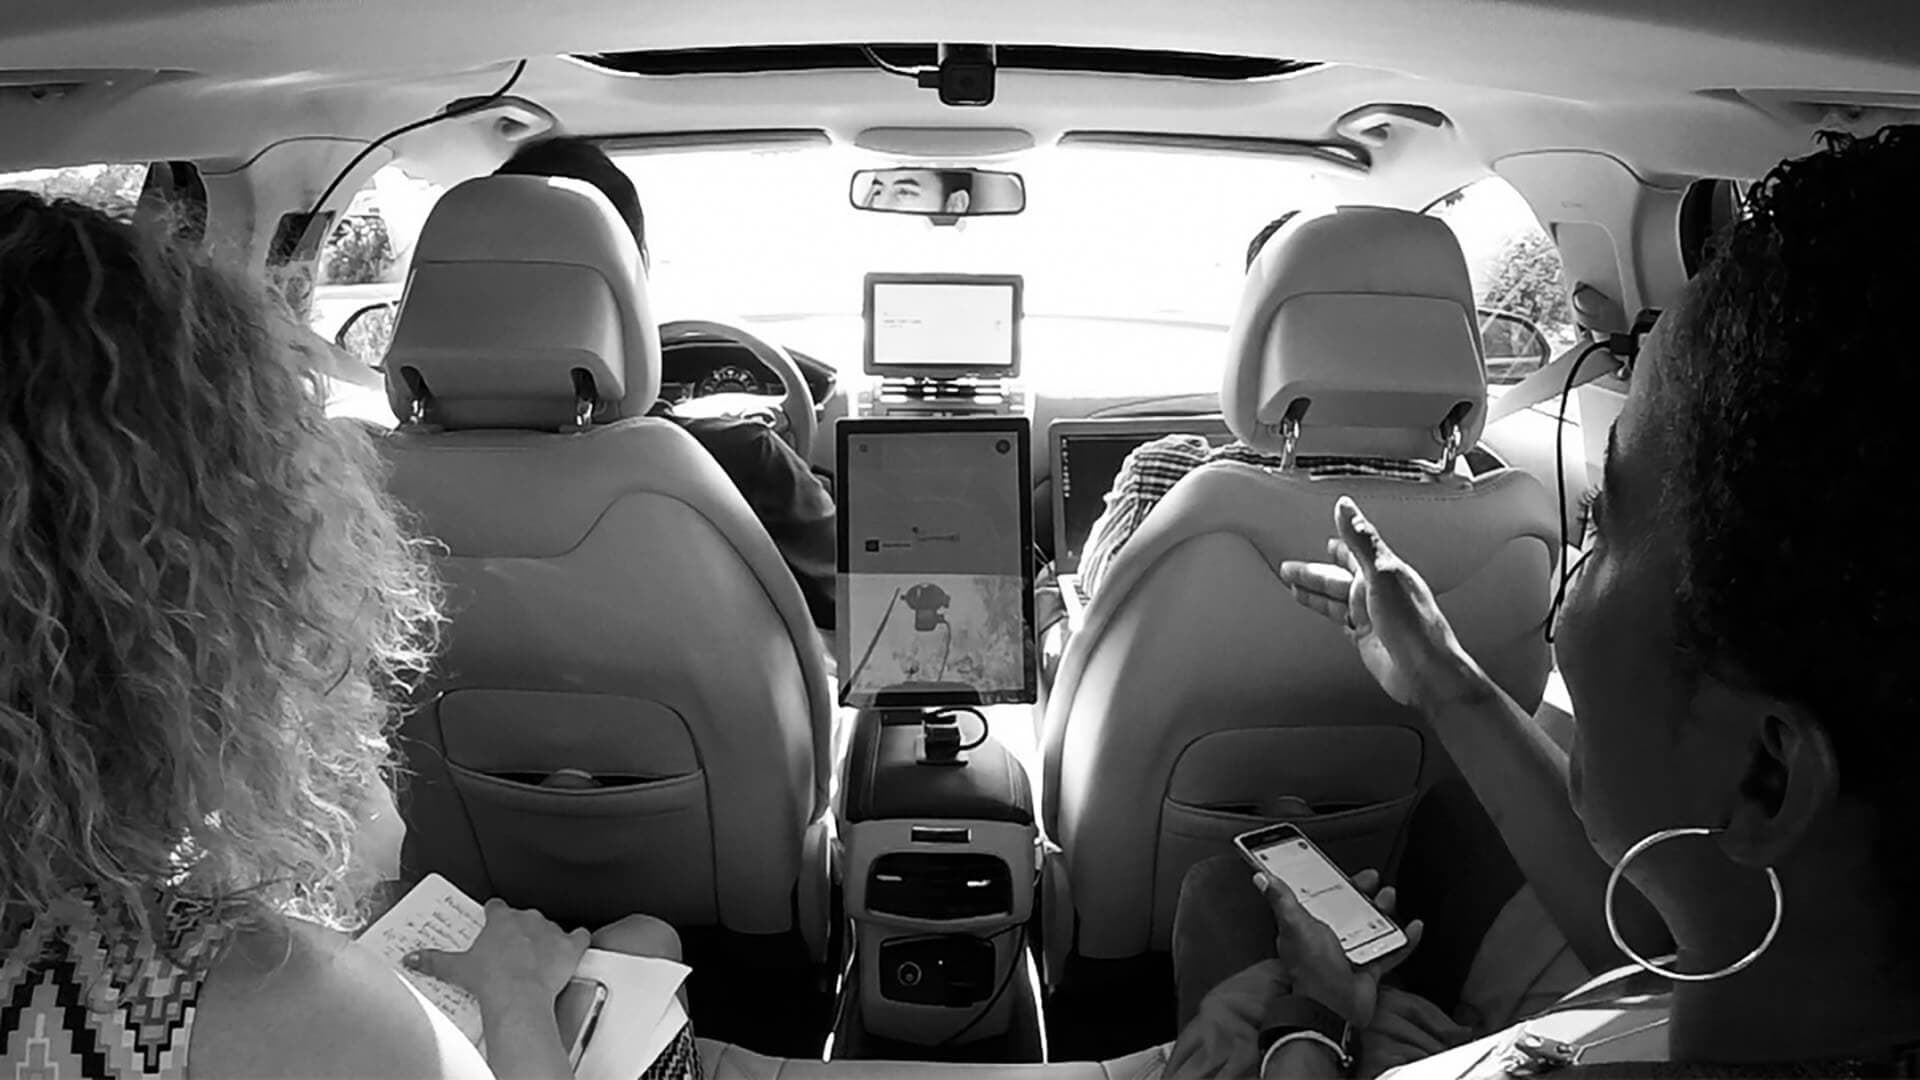 Three people sitting in car with phones and clipboards conducting user research